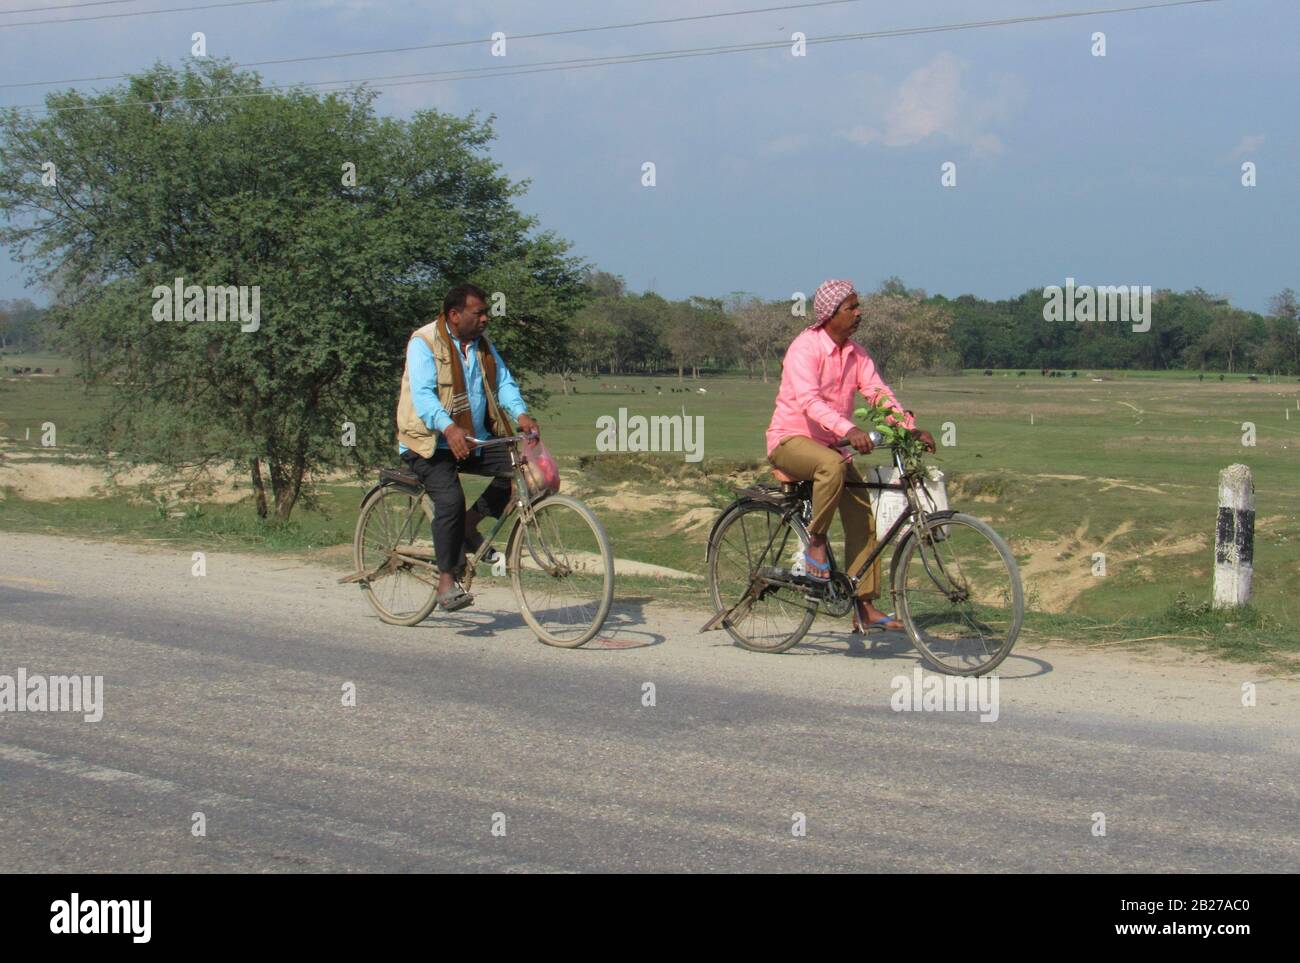 In Rural Nepalis men go on bicycles to far off towns for work, Rohini Rural Area, Rupandehi, Nepal. Stock Photo